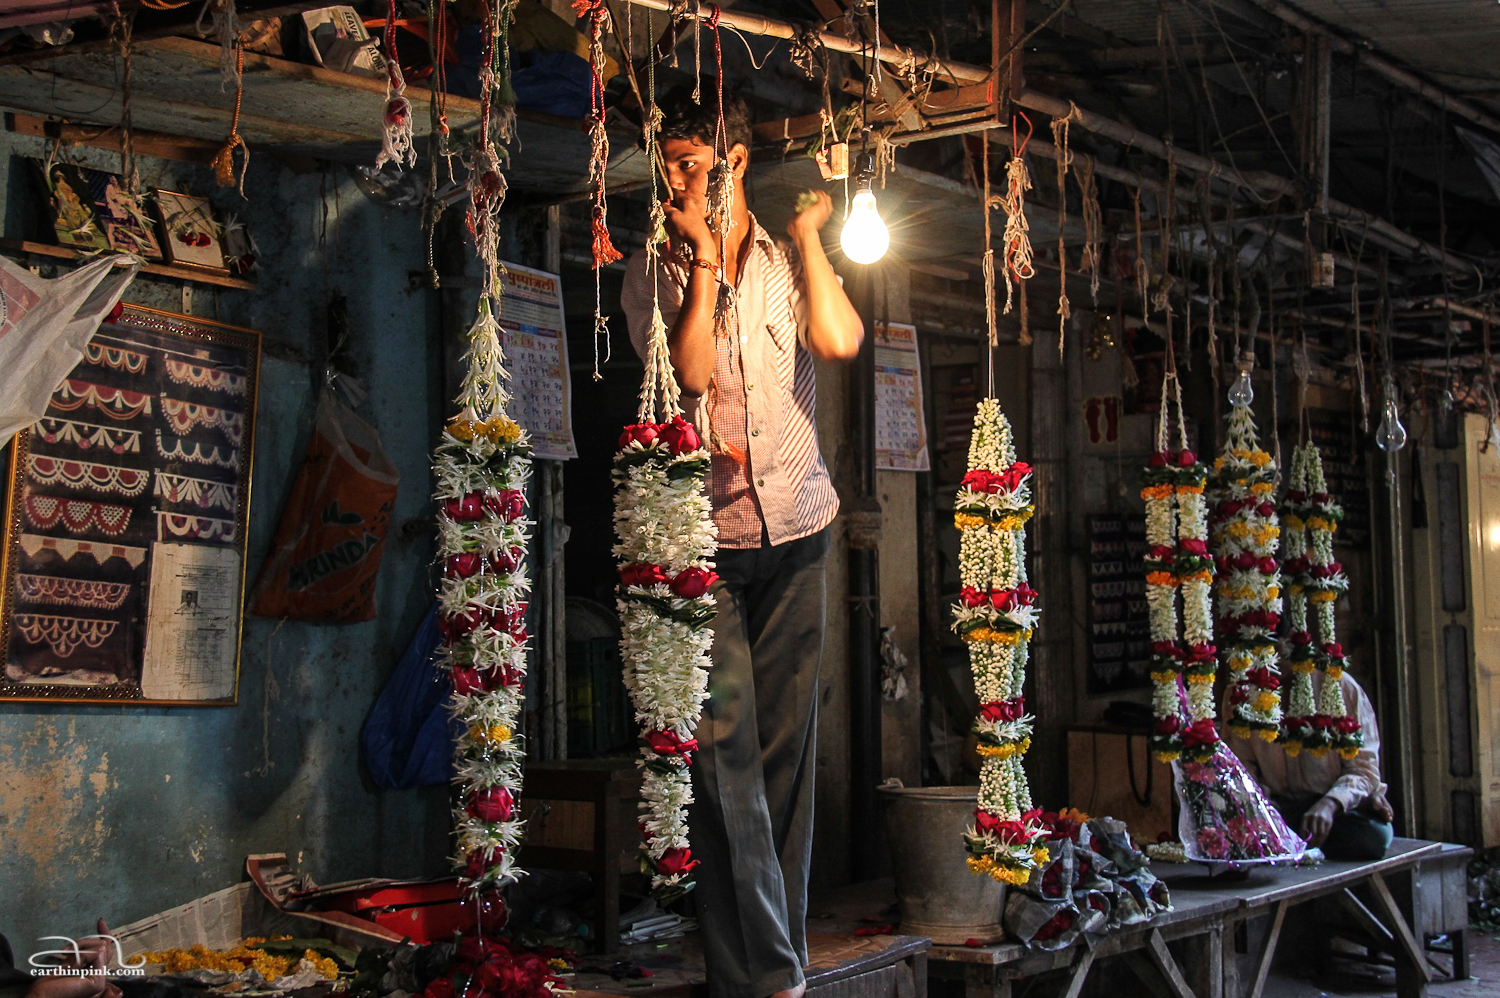 A boy selling flower garlands at a market in Mumbai, India